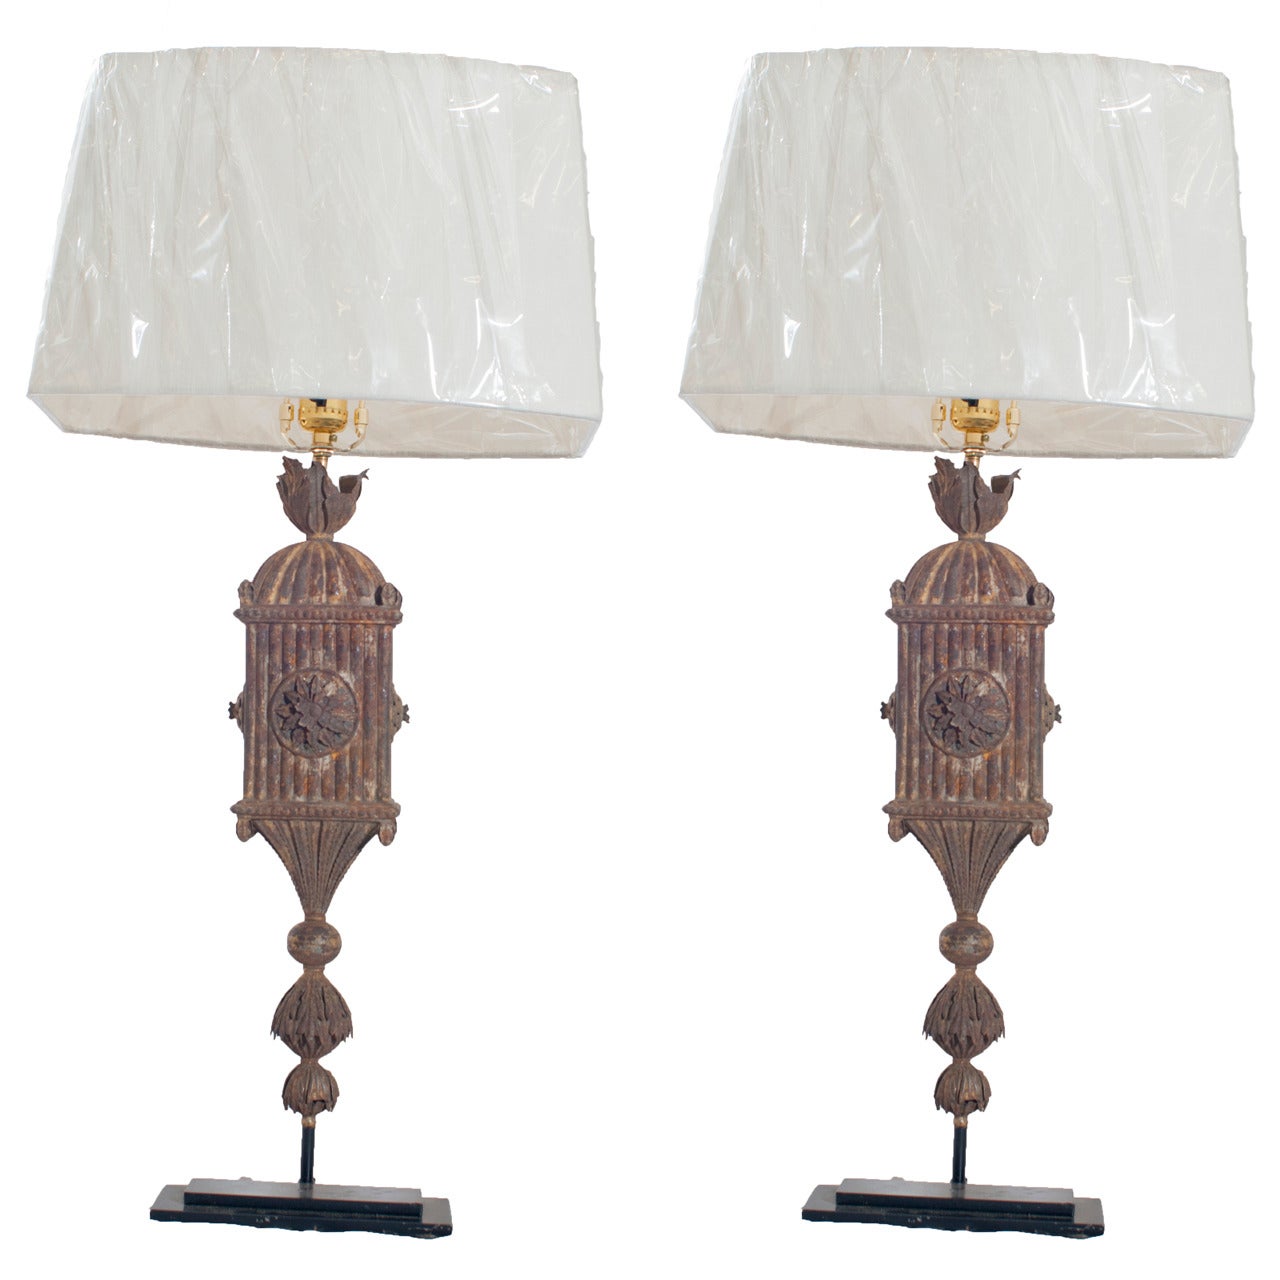 Pair of Gilt Table Lamps